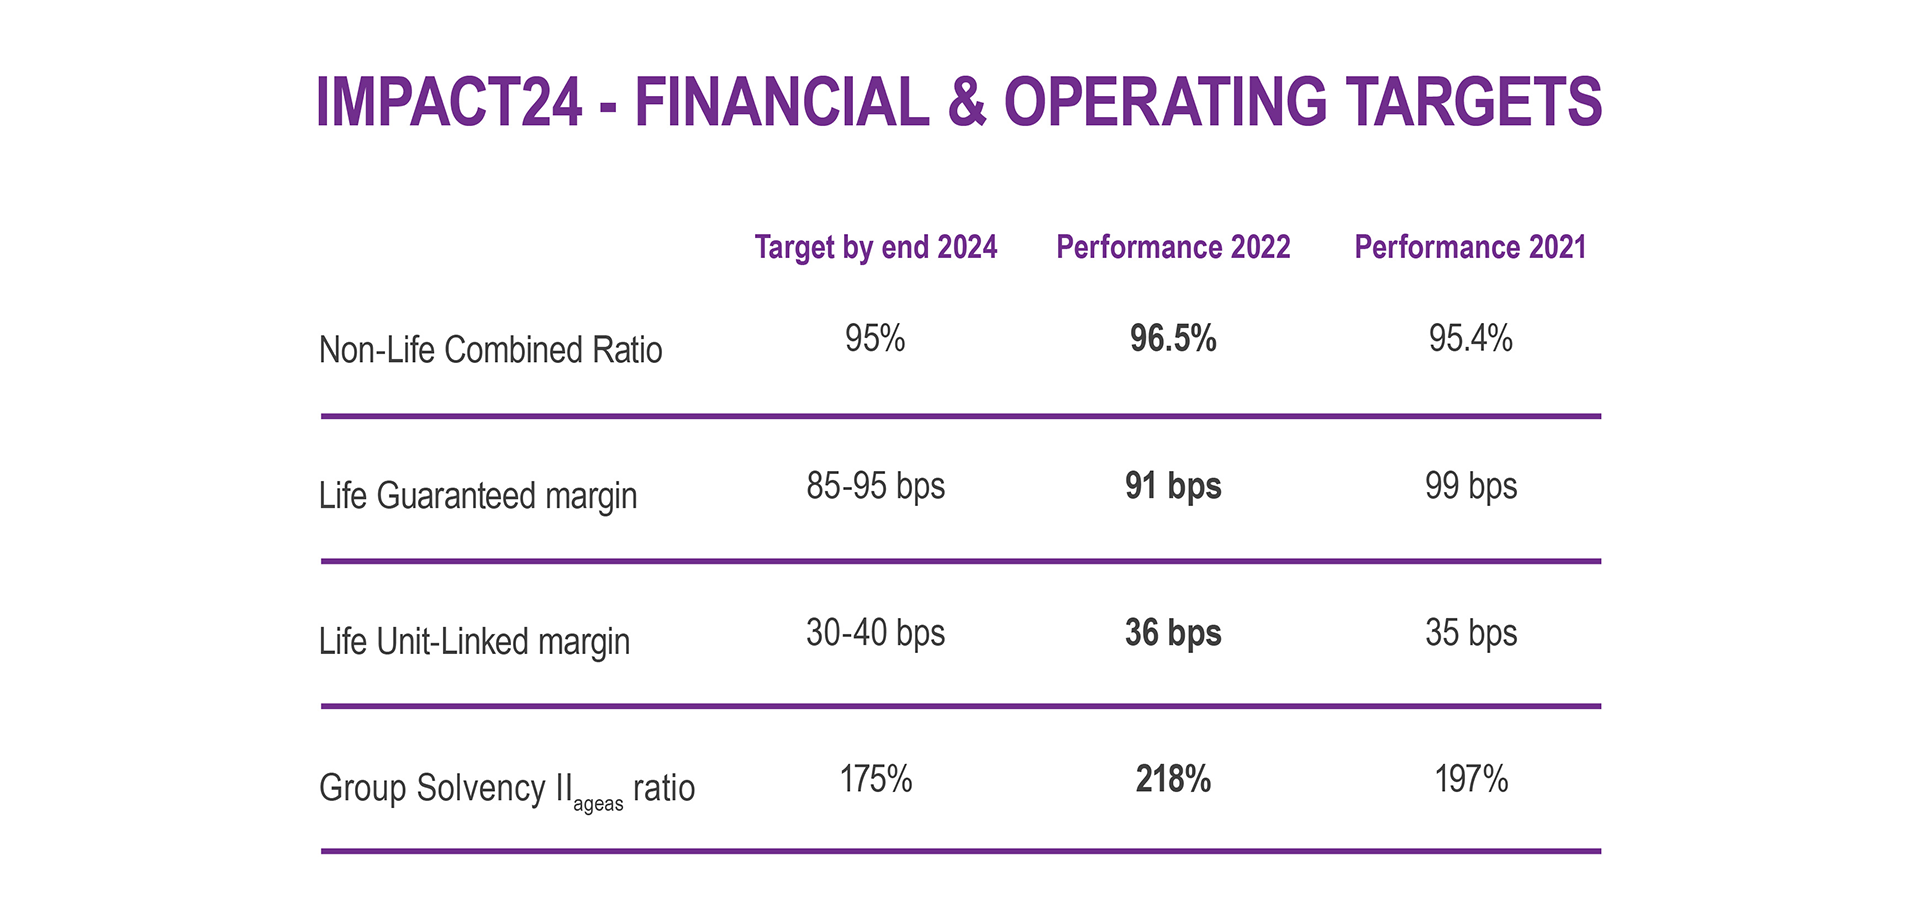 Financial & Operational Performance - Impact24 Targets